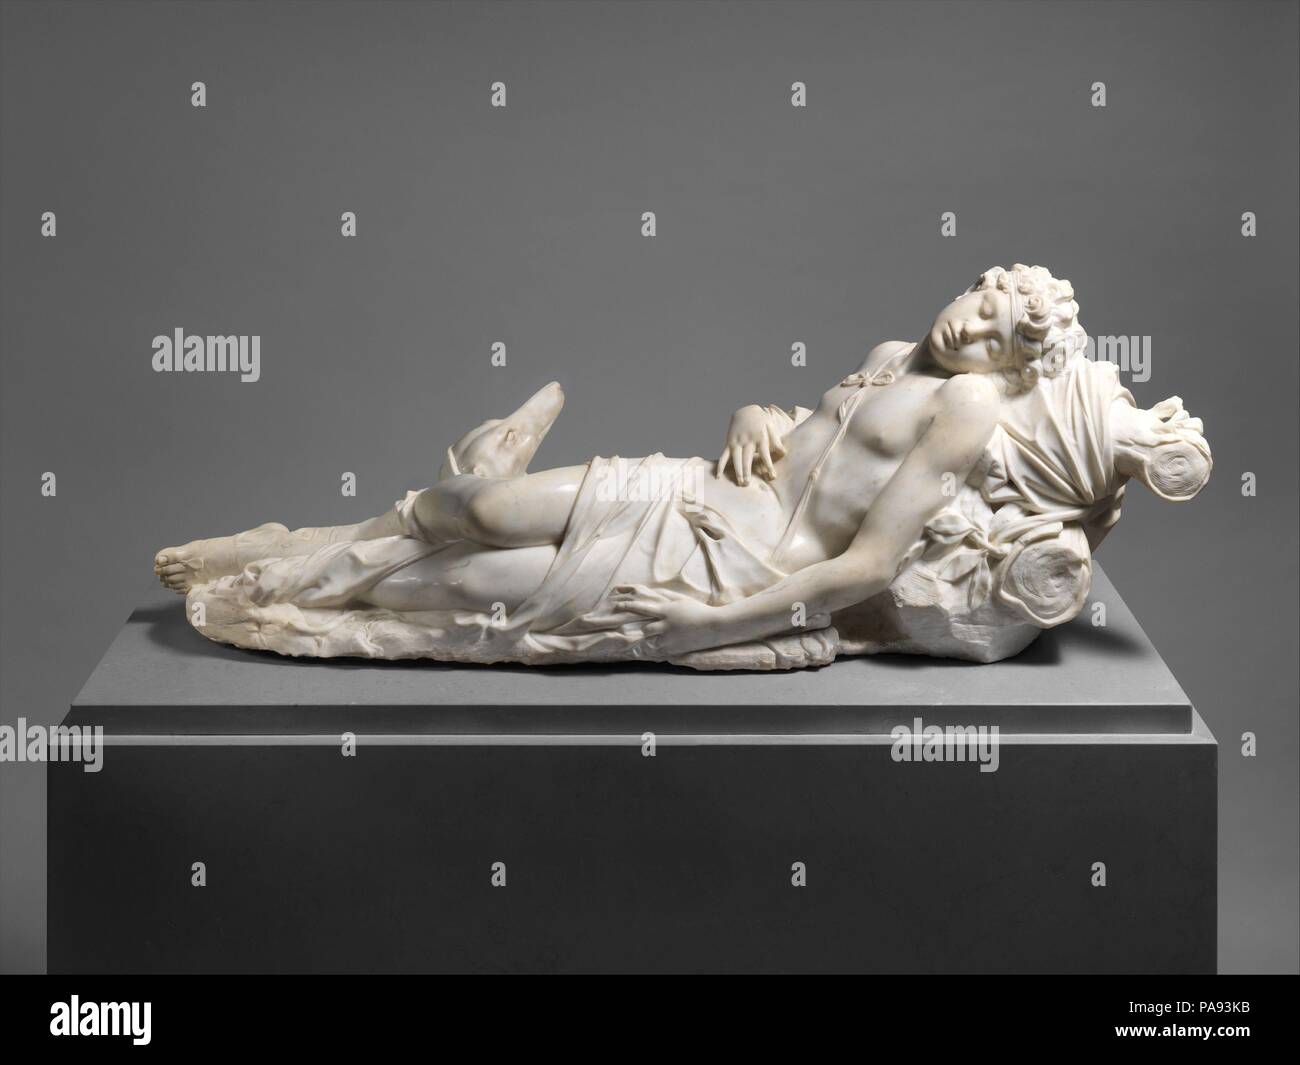 and A photography corradini hi-res Alamy images stock -